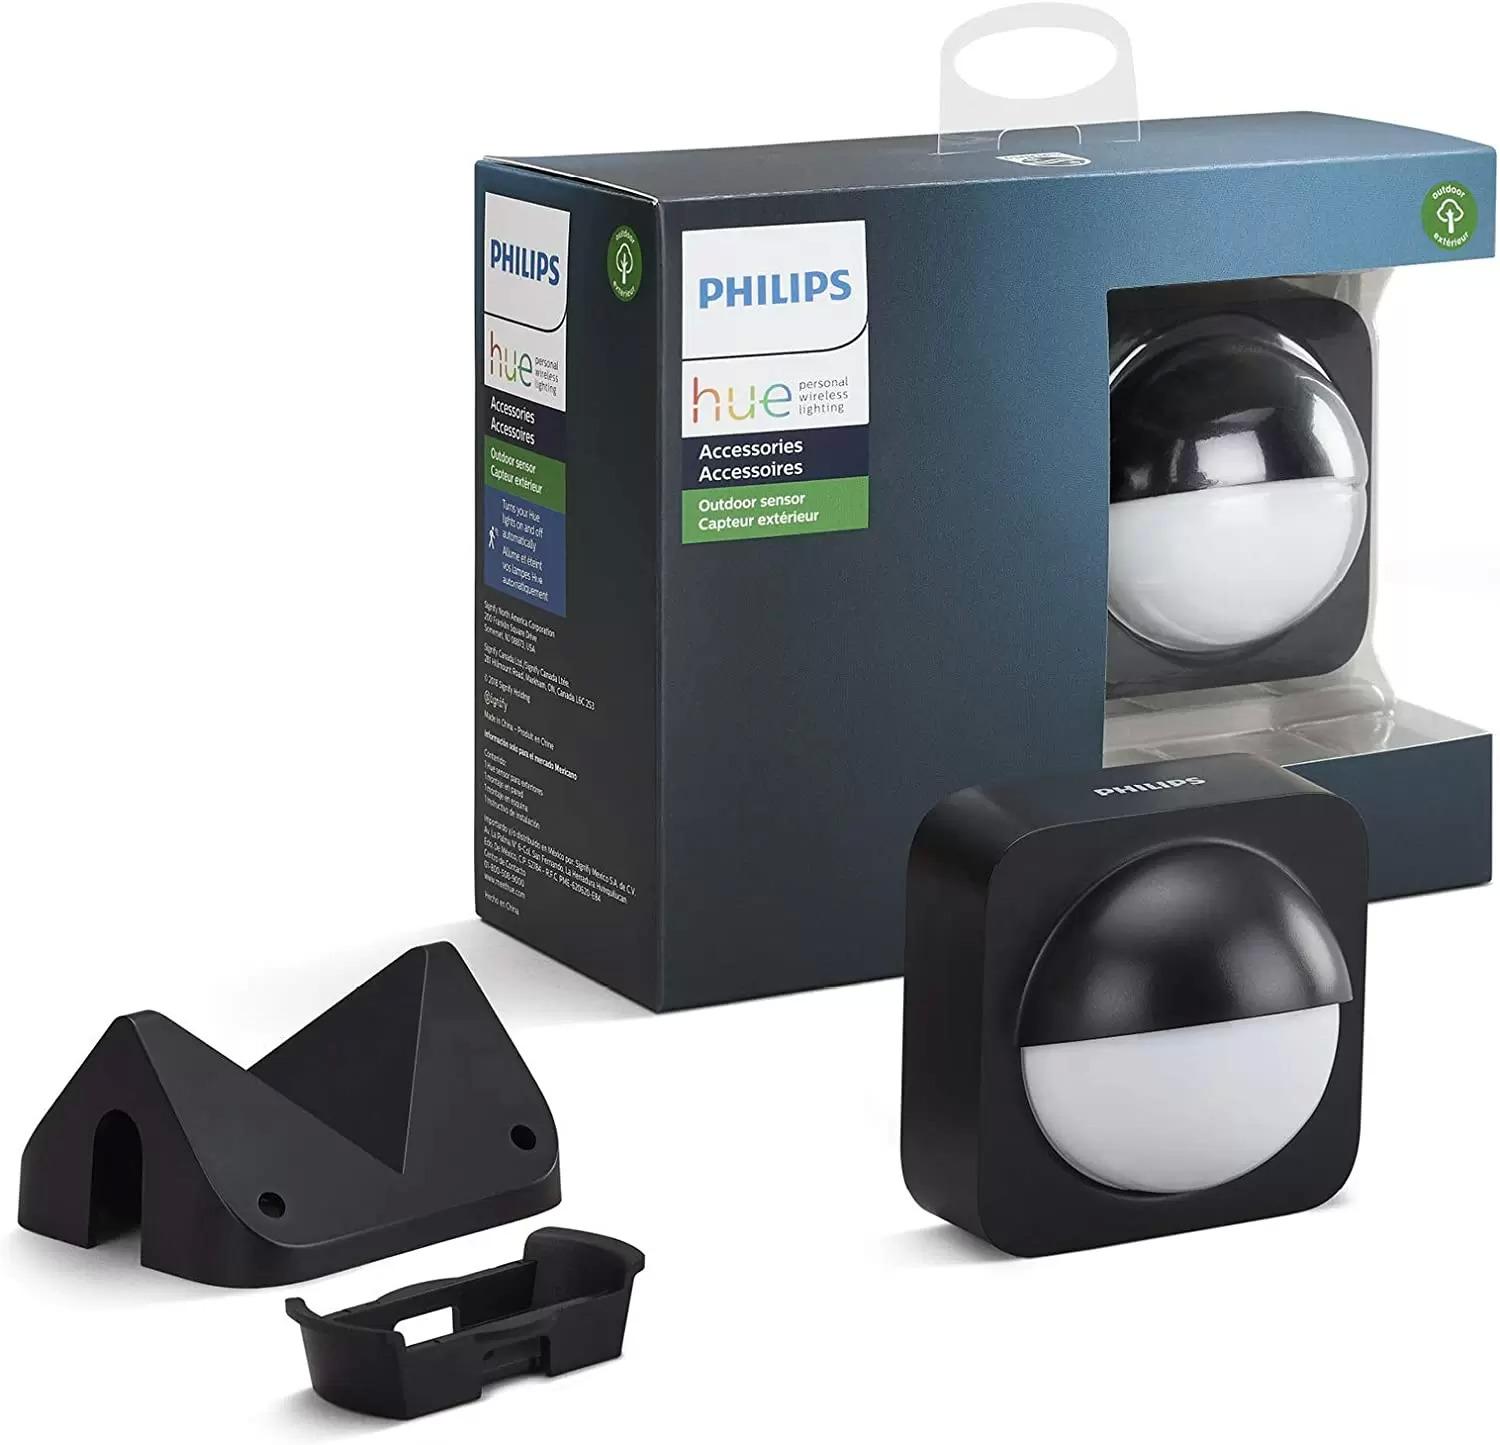 Philips Hue Dusk-to-Dawn Wireless Outdoor Motion Sensor for $34.99 Shipped